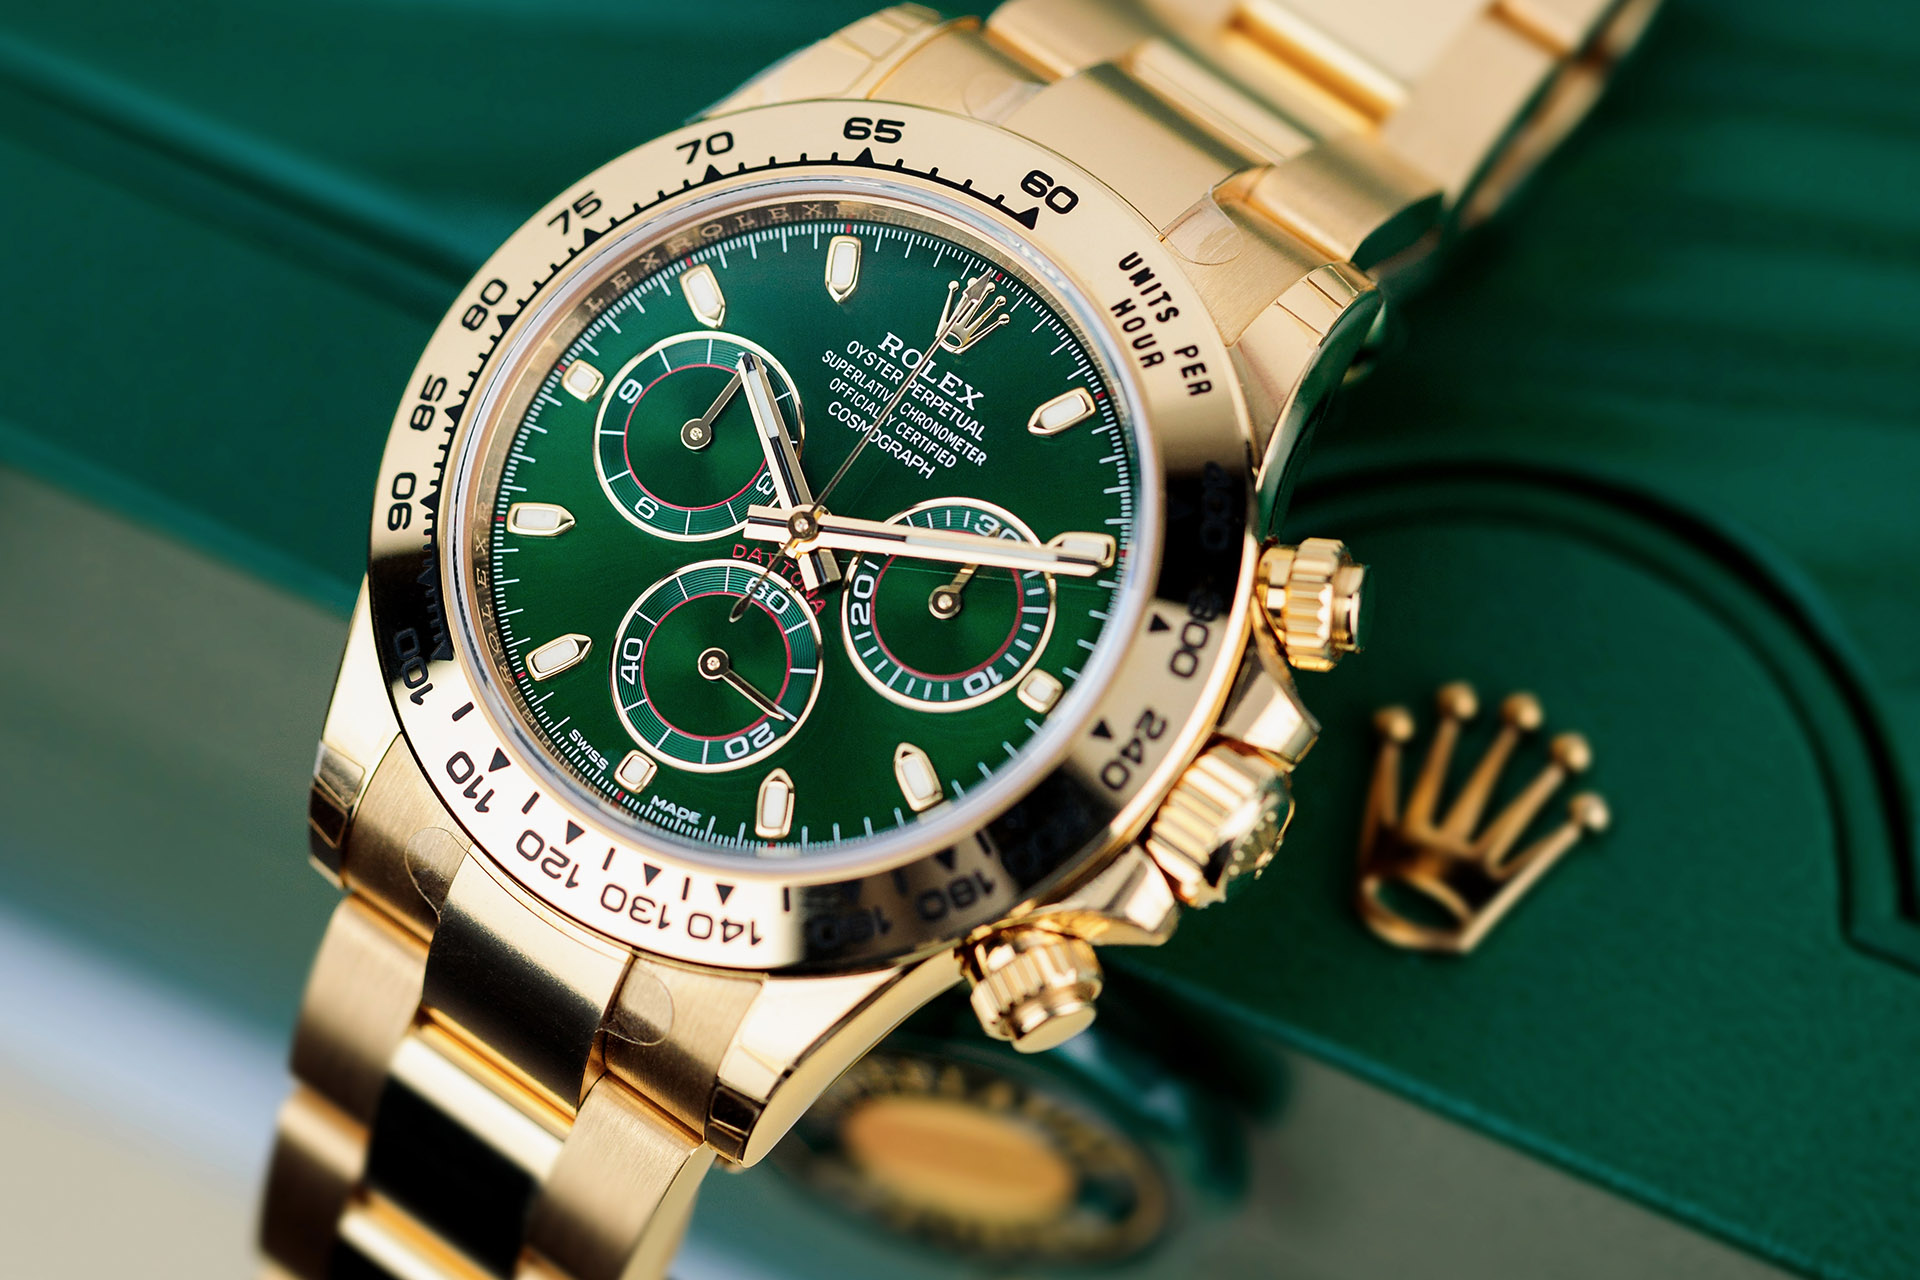 Rolex Releases New Oyster Perpetual Watches With 'Celebration' Dials |  aBlogtoWatch